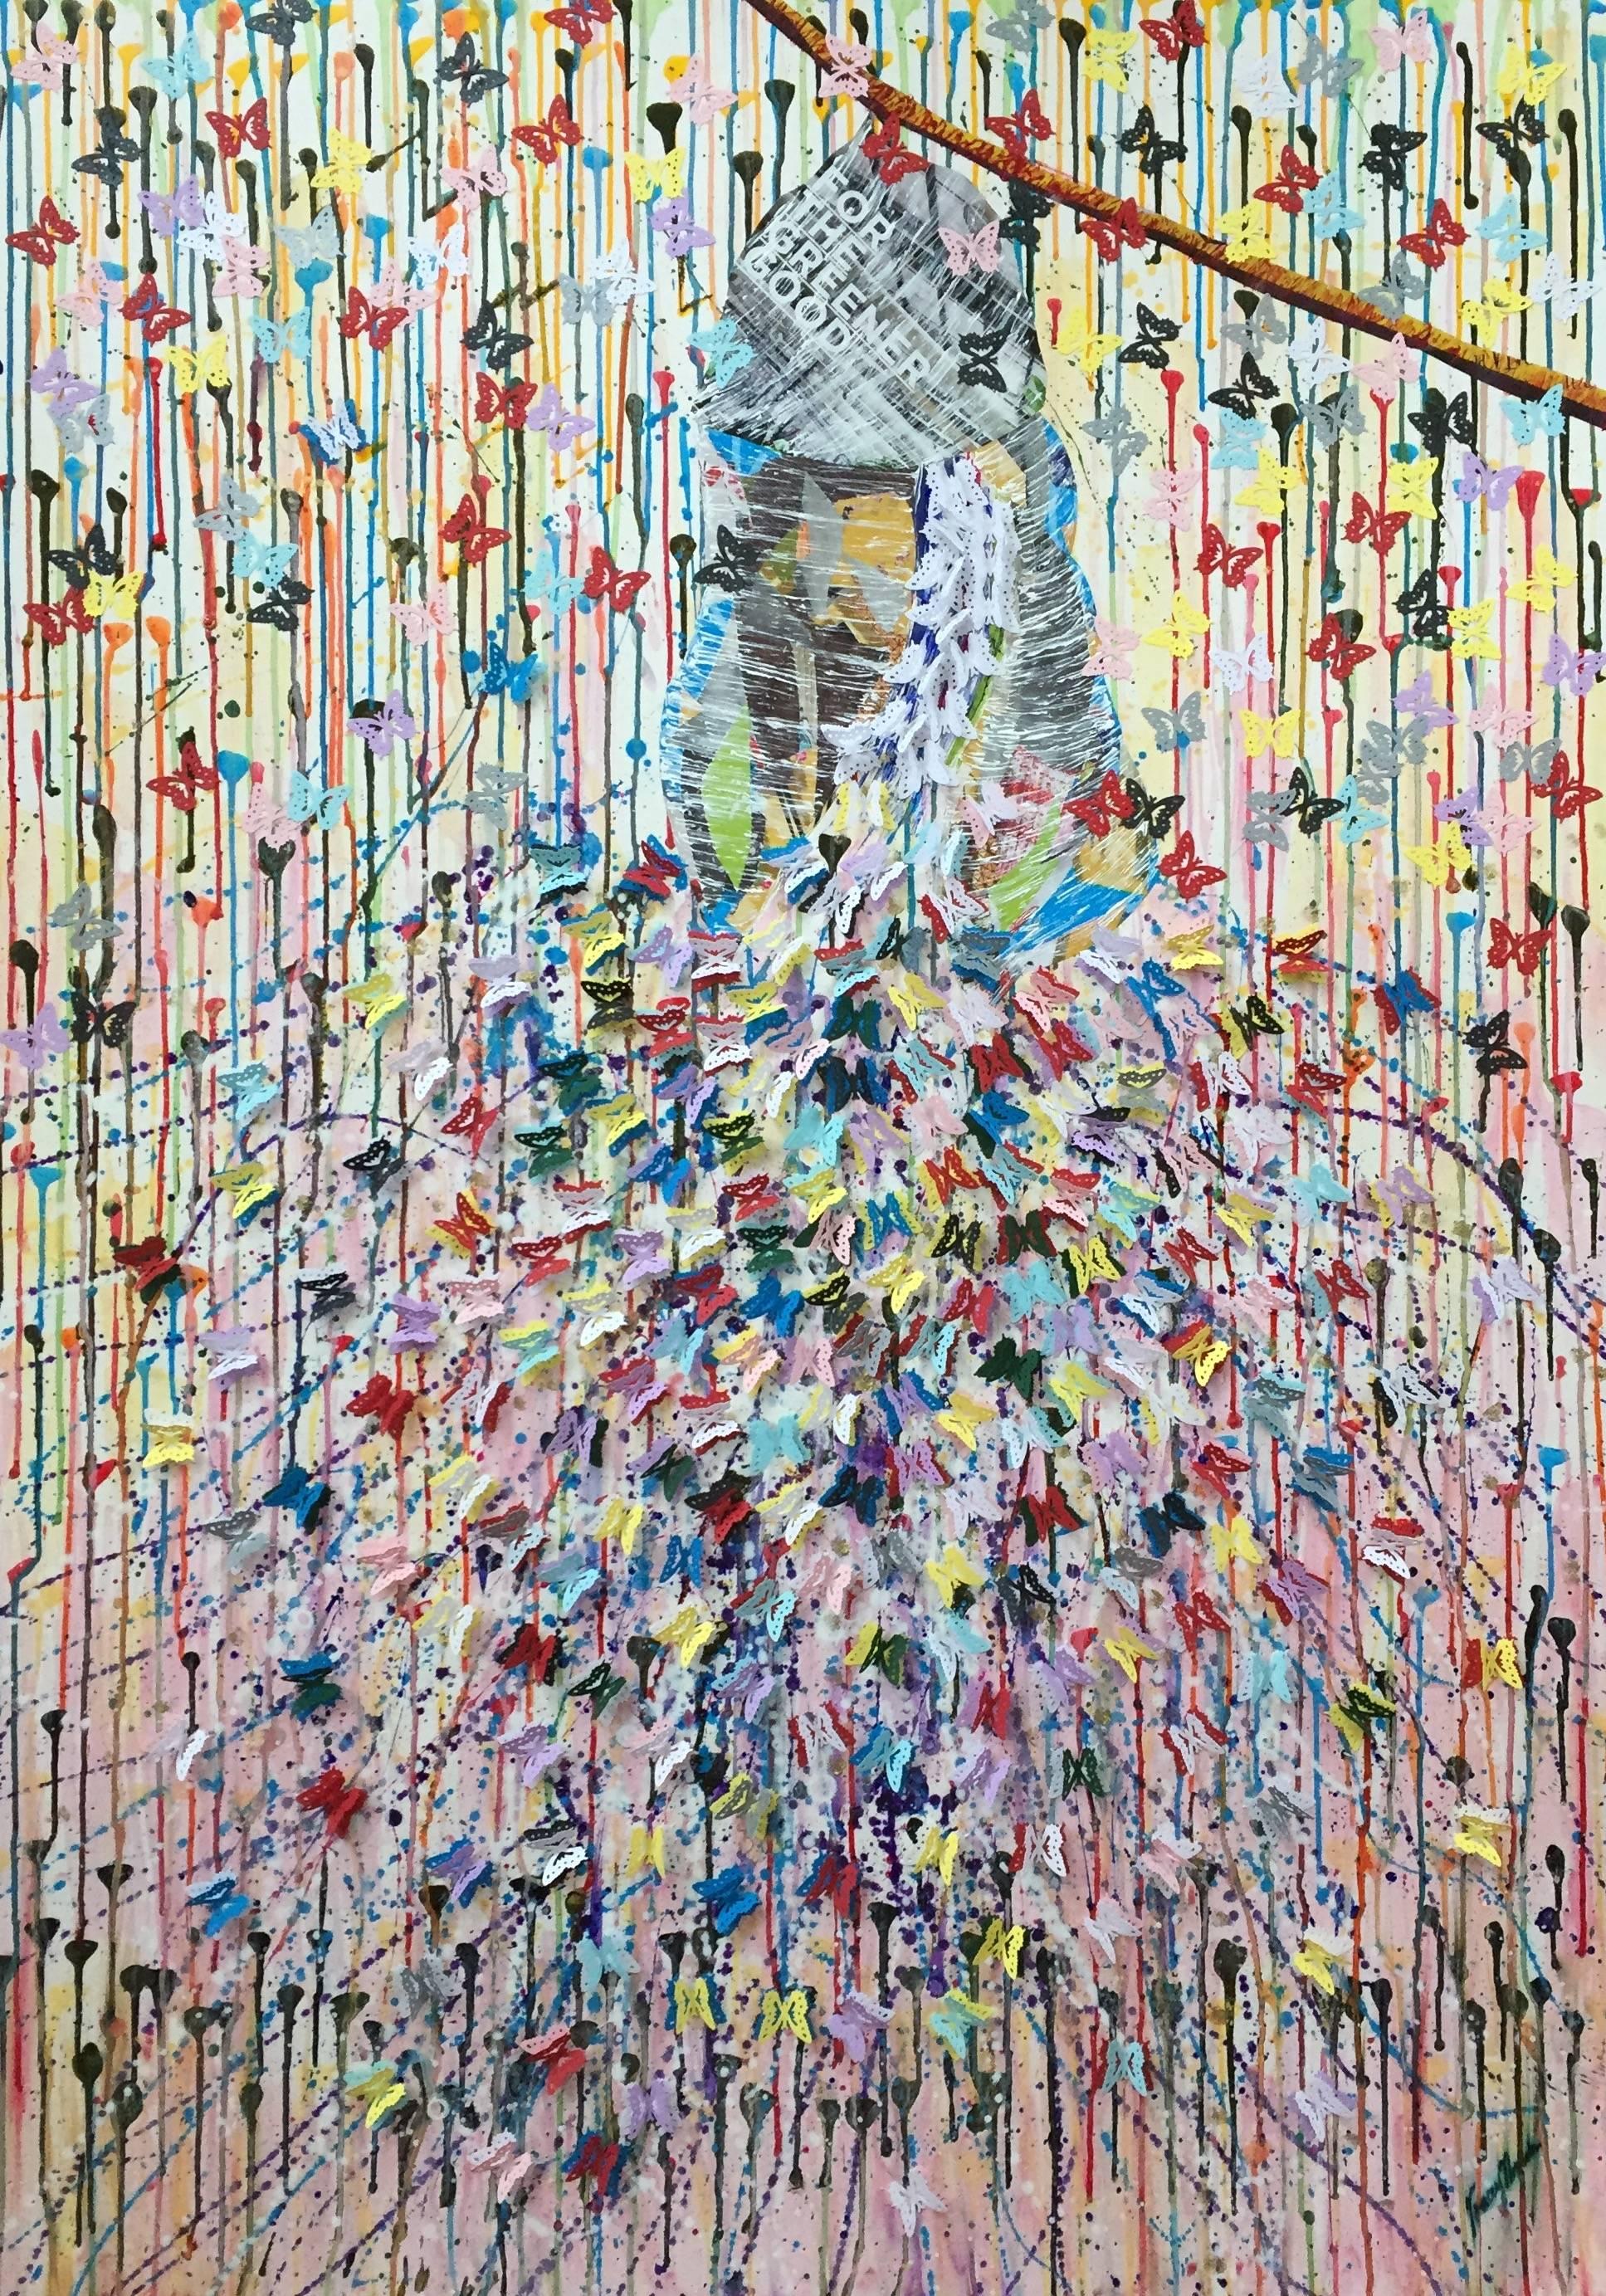 Tracey Thornton Animal Painting - First Flight, Original, Art, Acrylic on Canvas, Explosion of Butterflies. Signed